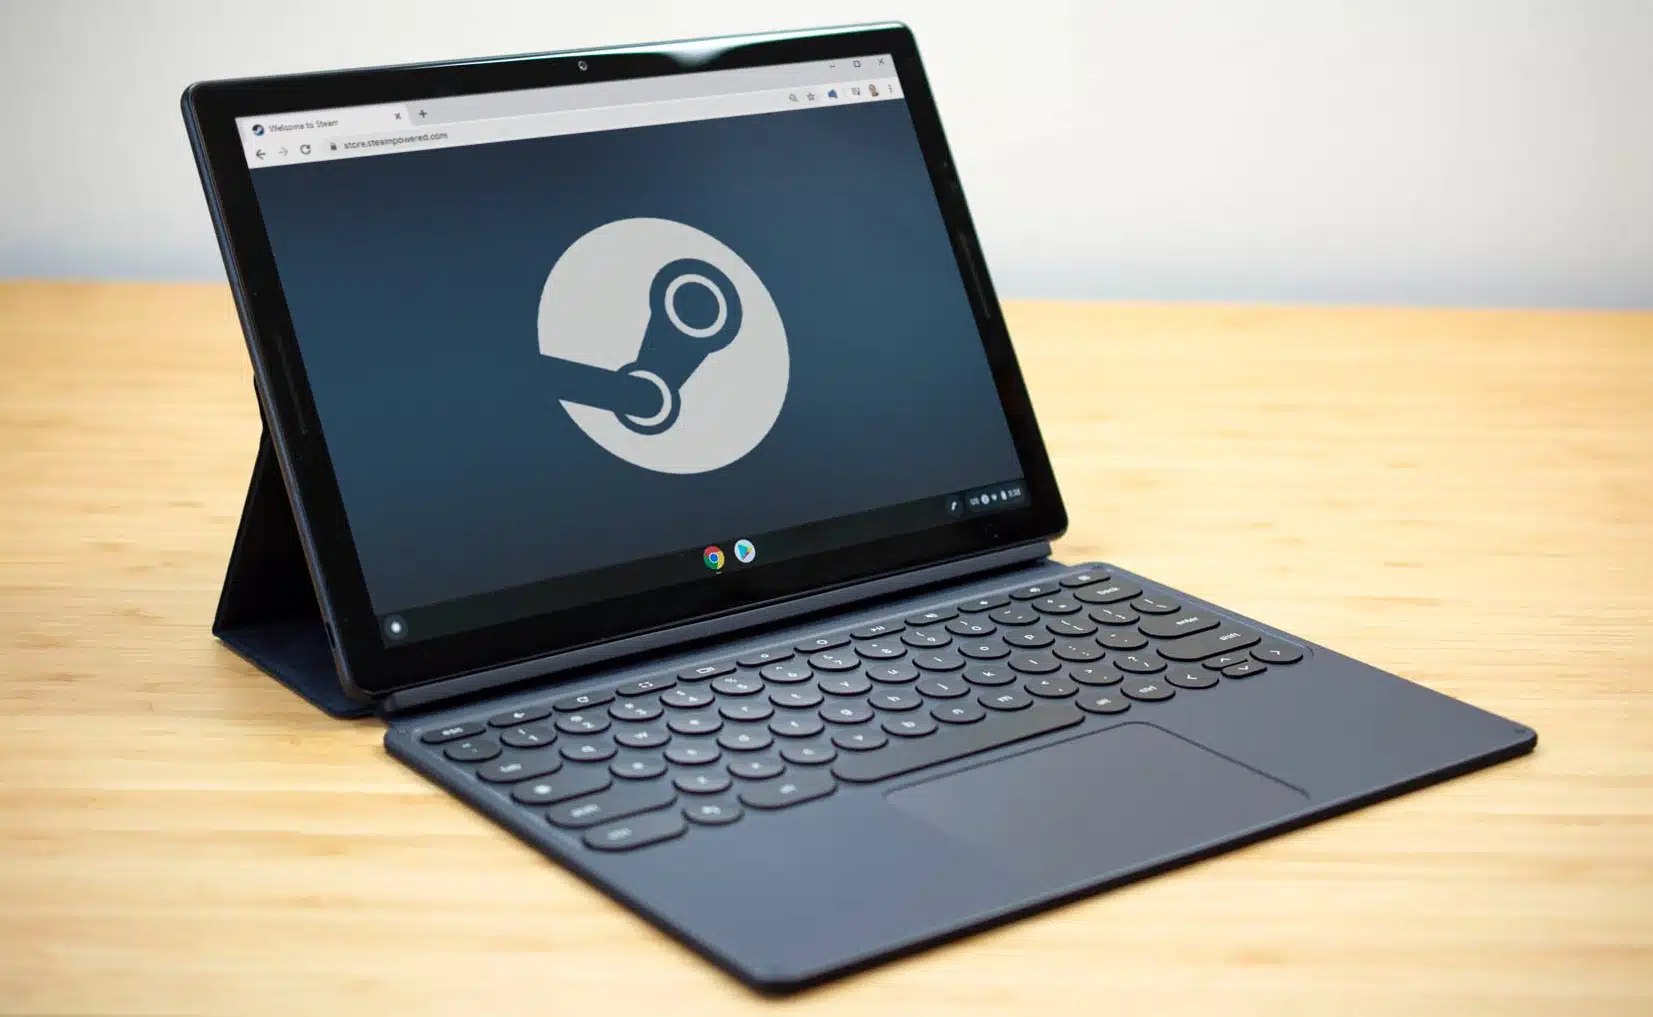 How To Install Steam on Chromebook